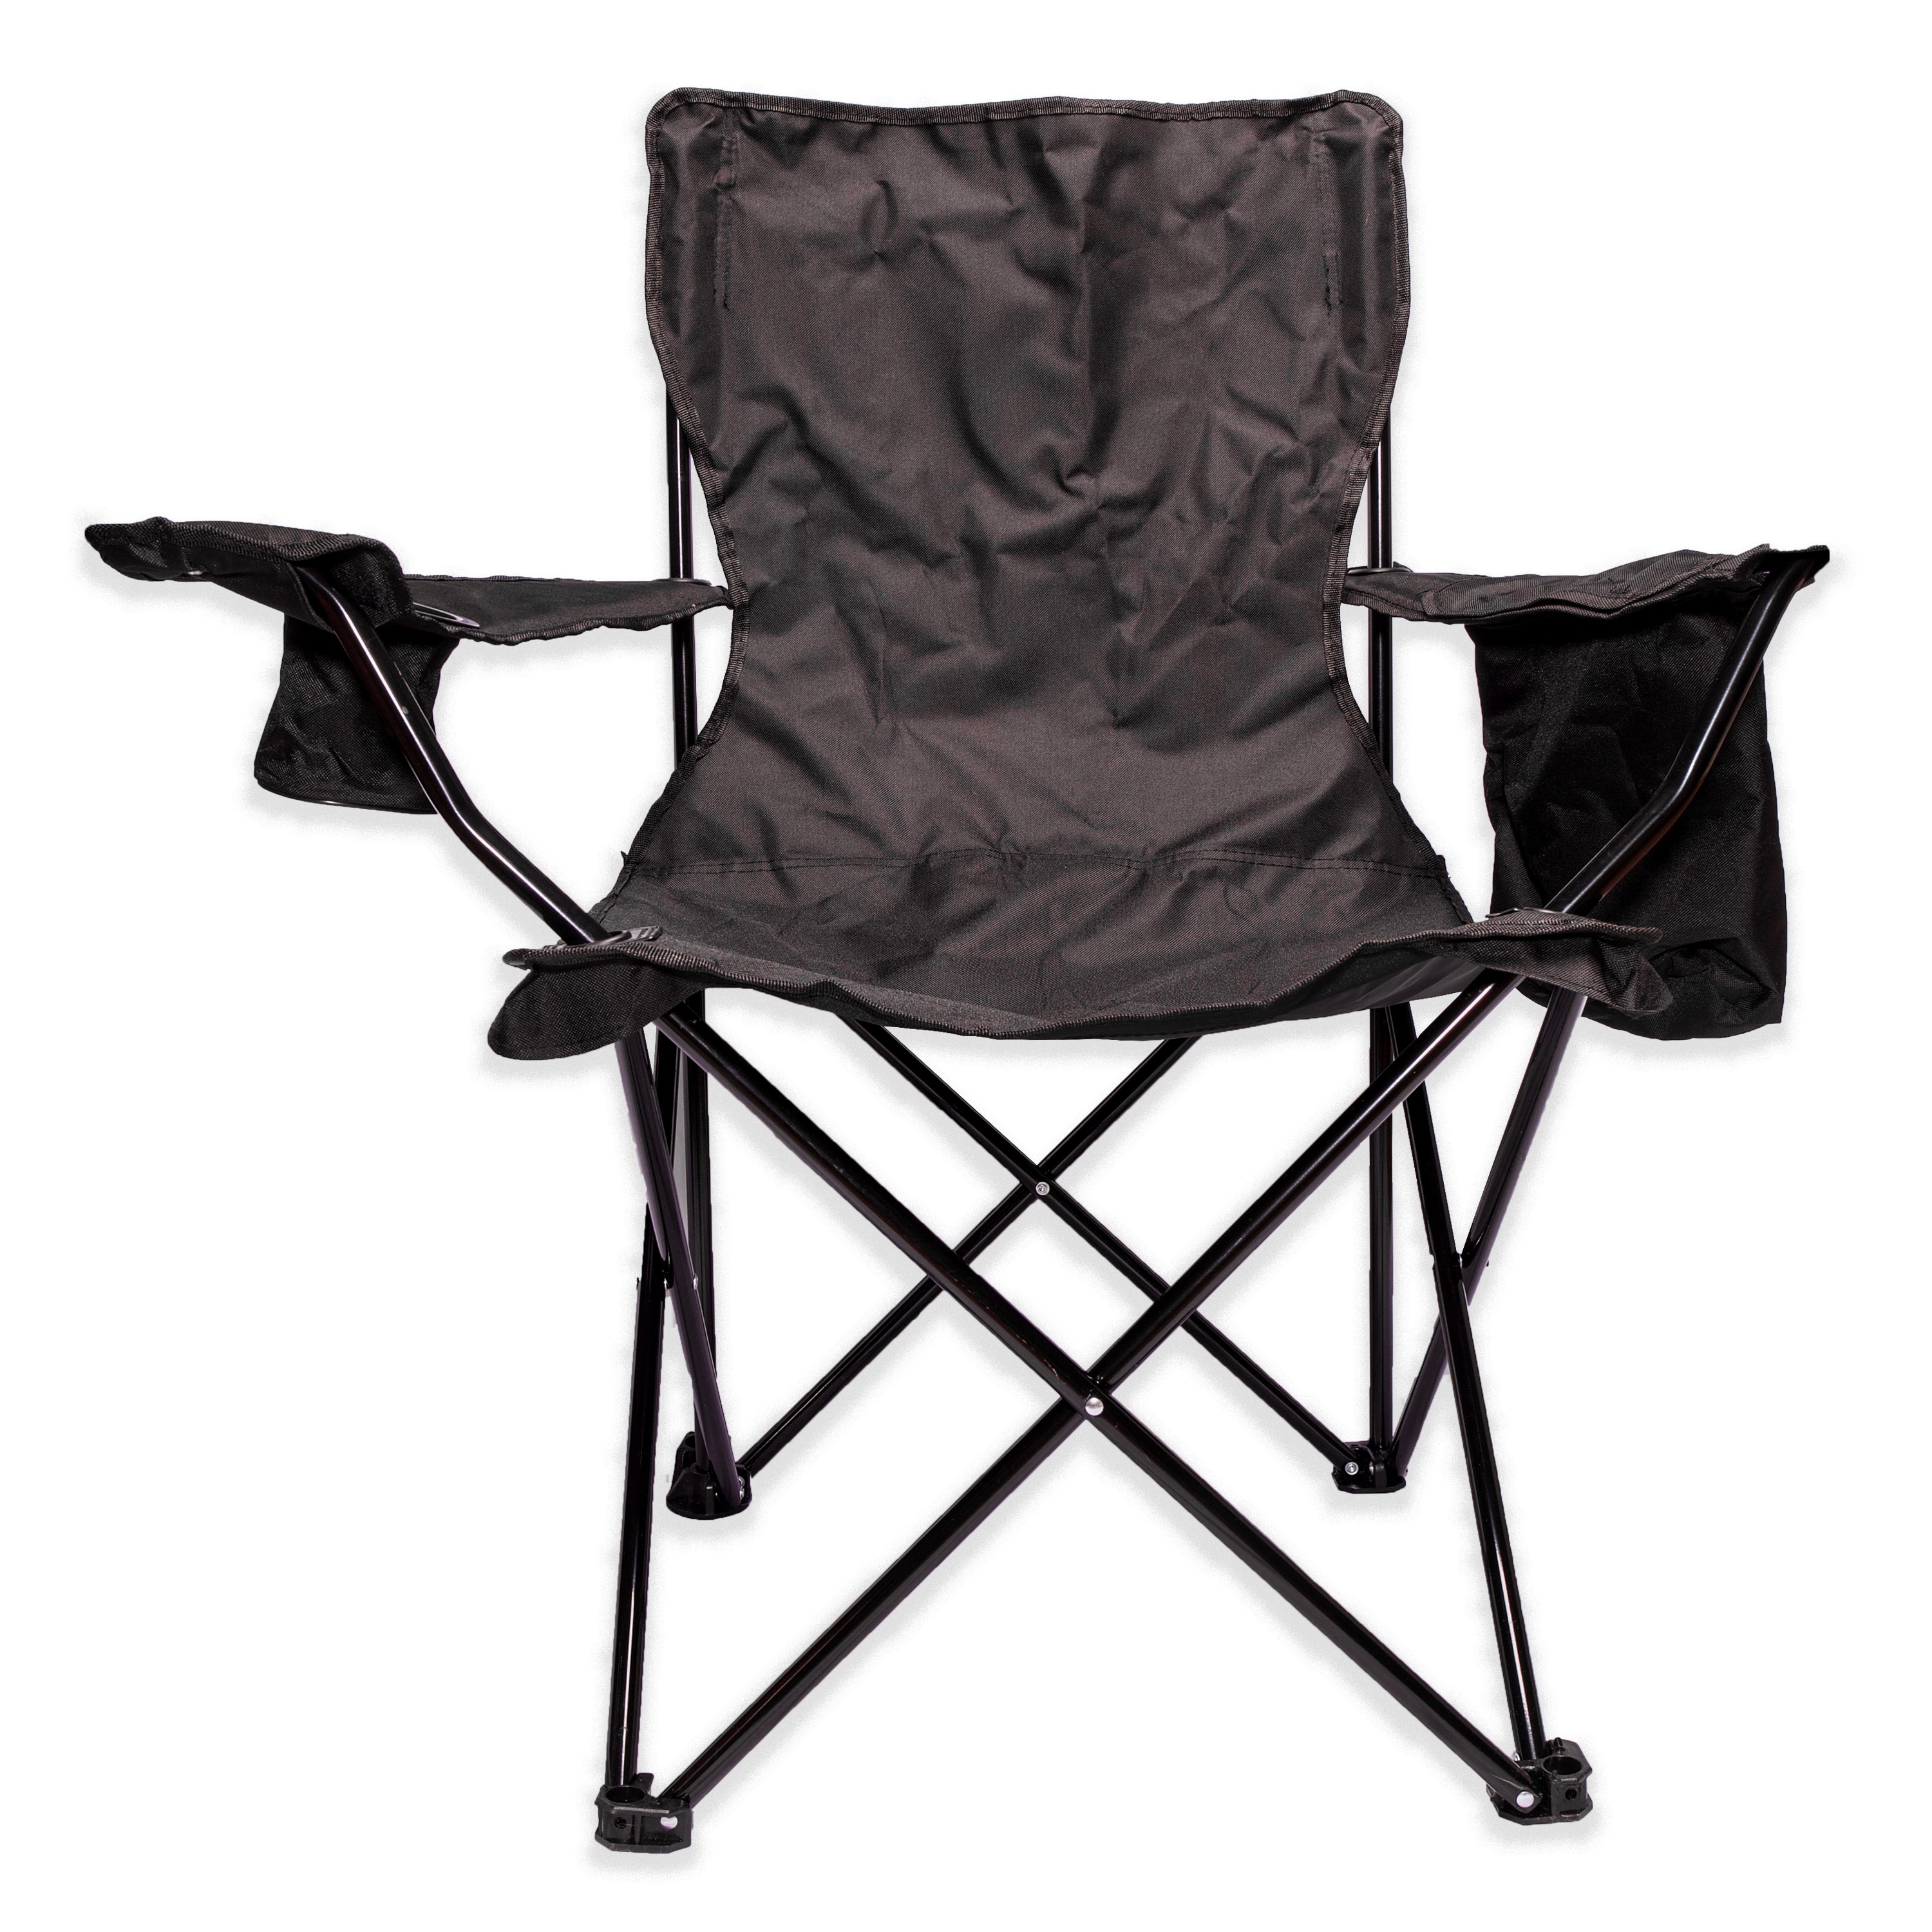 Flaming Skull Camping Chair with Cooler Arm Rest Pouch